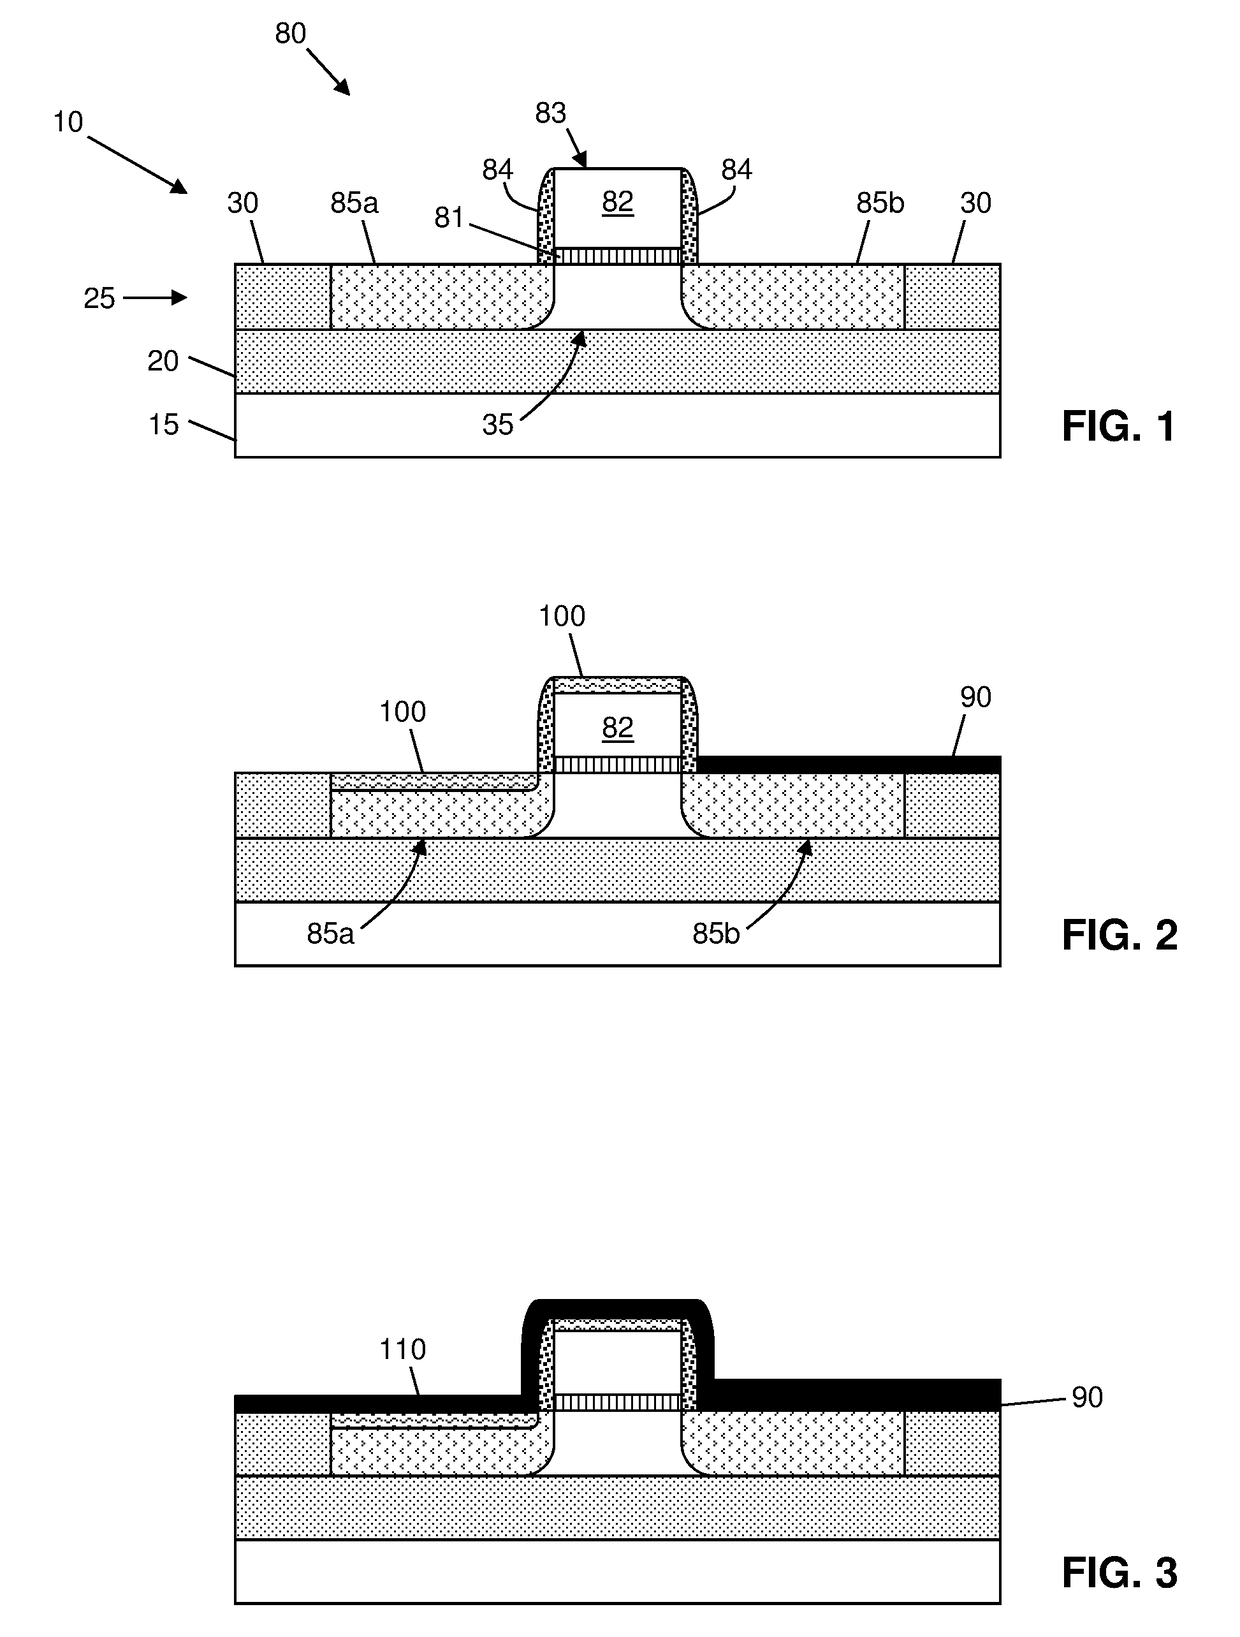 Integrated circuit heat dissipation using nanostructures